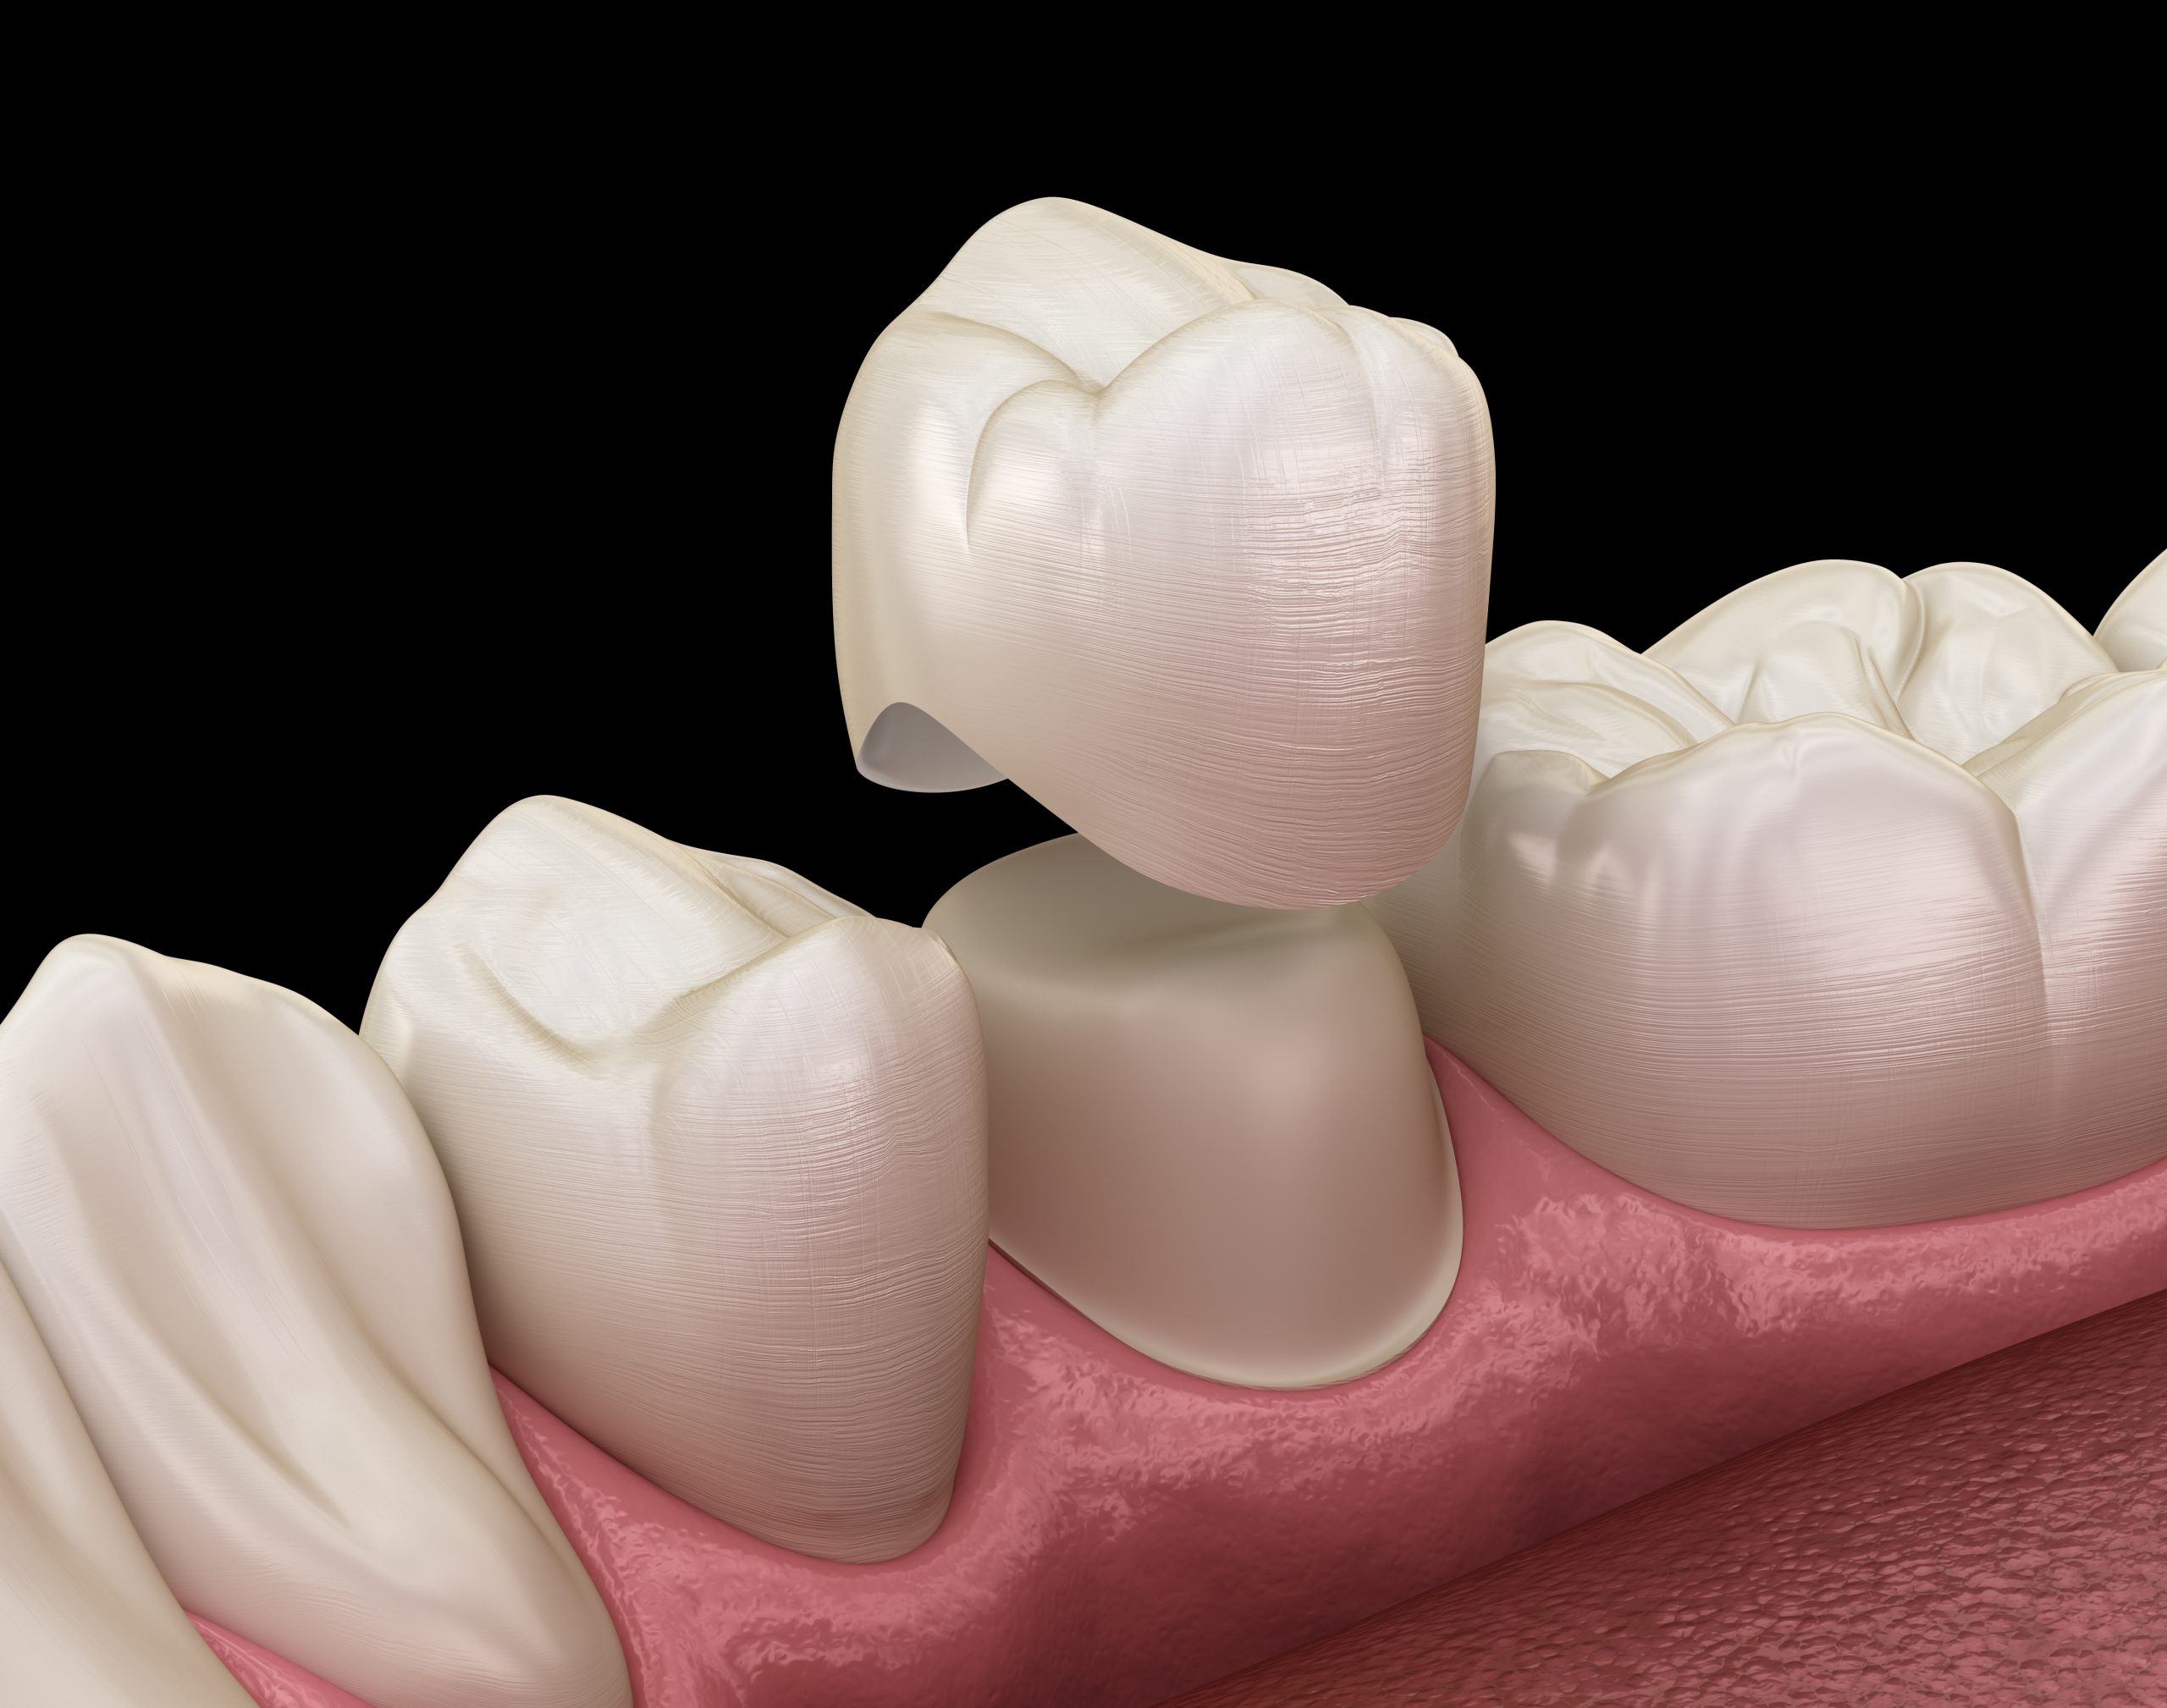 Dental crown premolar tooth assembly process. Medically accurate 3D illustration